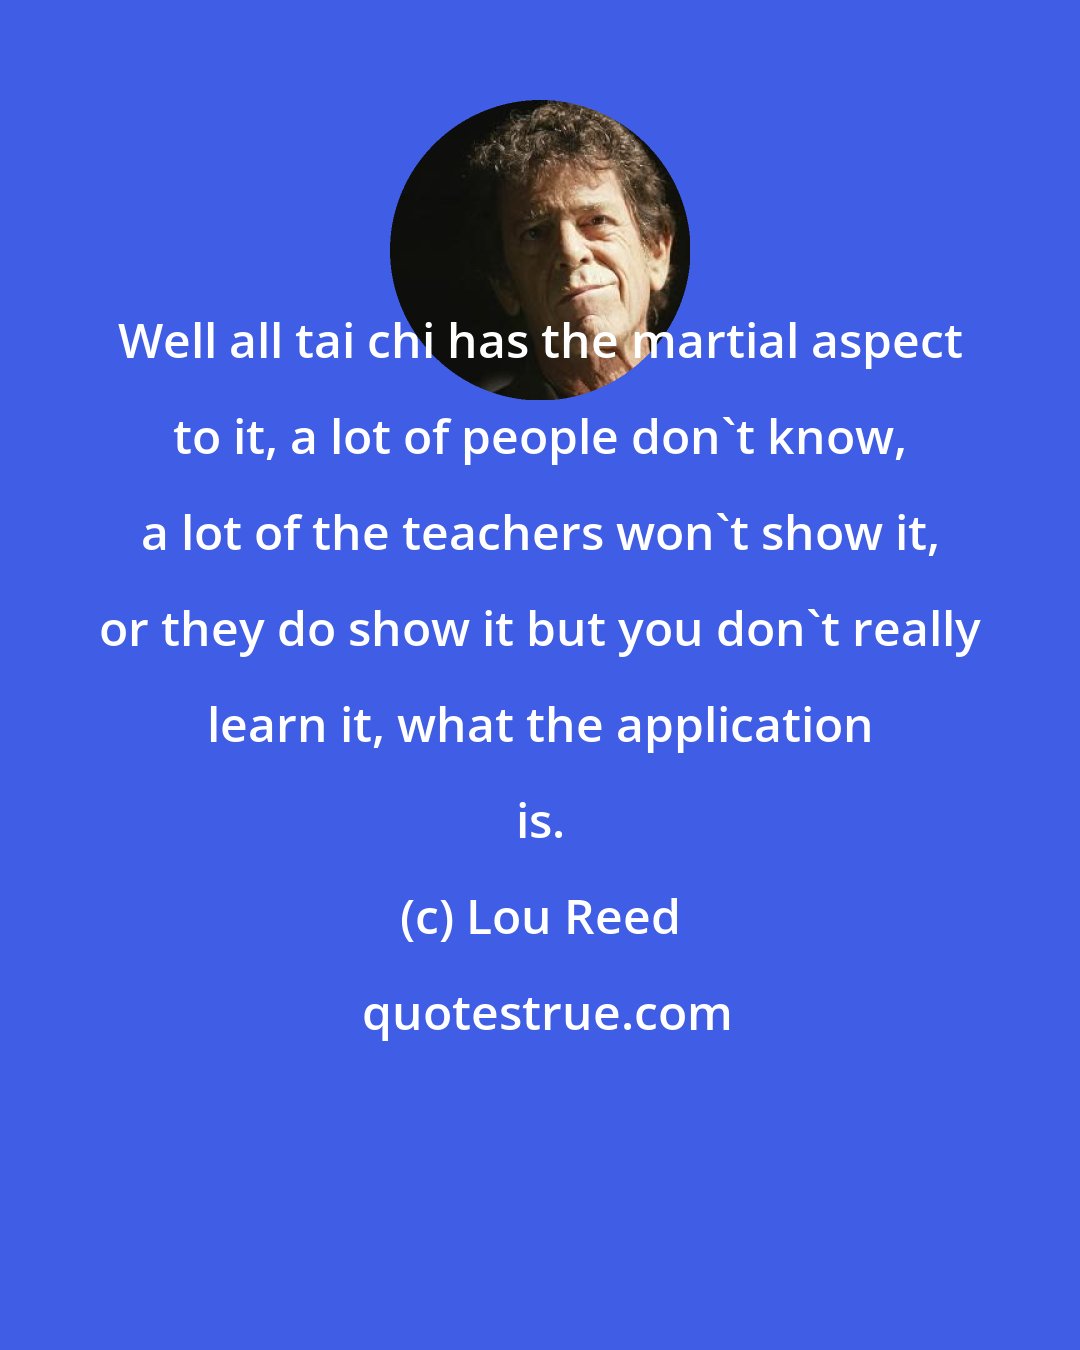 Lou Reed: Well all tai chi has the martial aspect to it, a lot of people don't know, a lot of the teachers won't show it, or they do show it but you don't really learn it, what the application is.